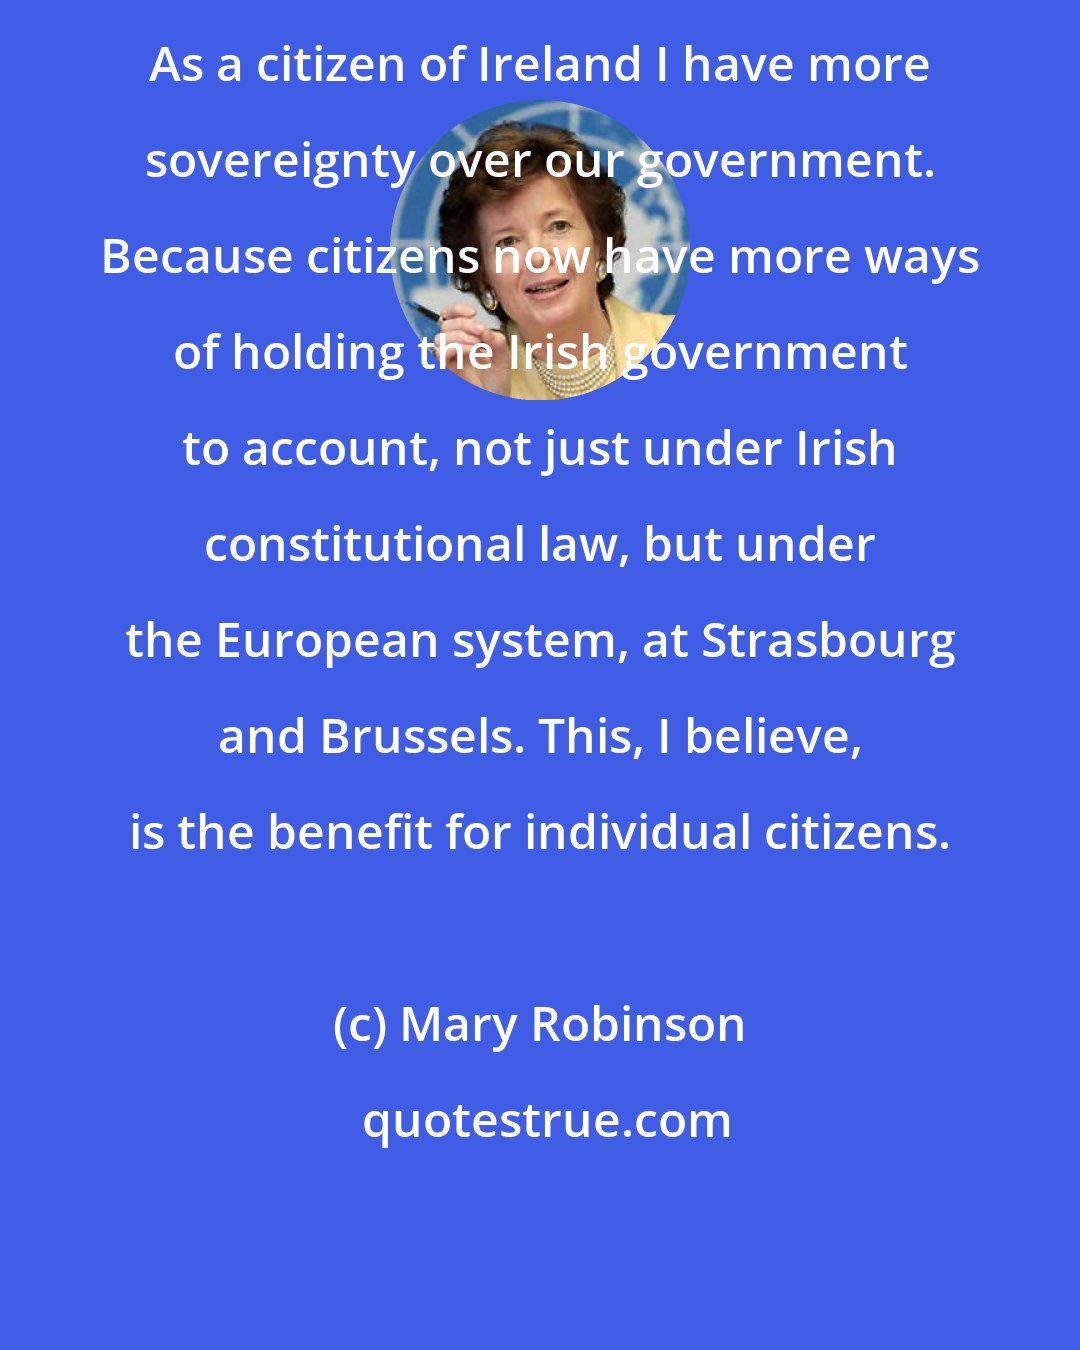 Mary Robinson: As a citizen of Ireland I have more sovereignty over our government. Because citizens now have more ways of holding the Irish government to account, not just under Irish constitutional law, but under the European system, at Strasbourg and Brussels. This, I believe, is the benefit for individual citizens.